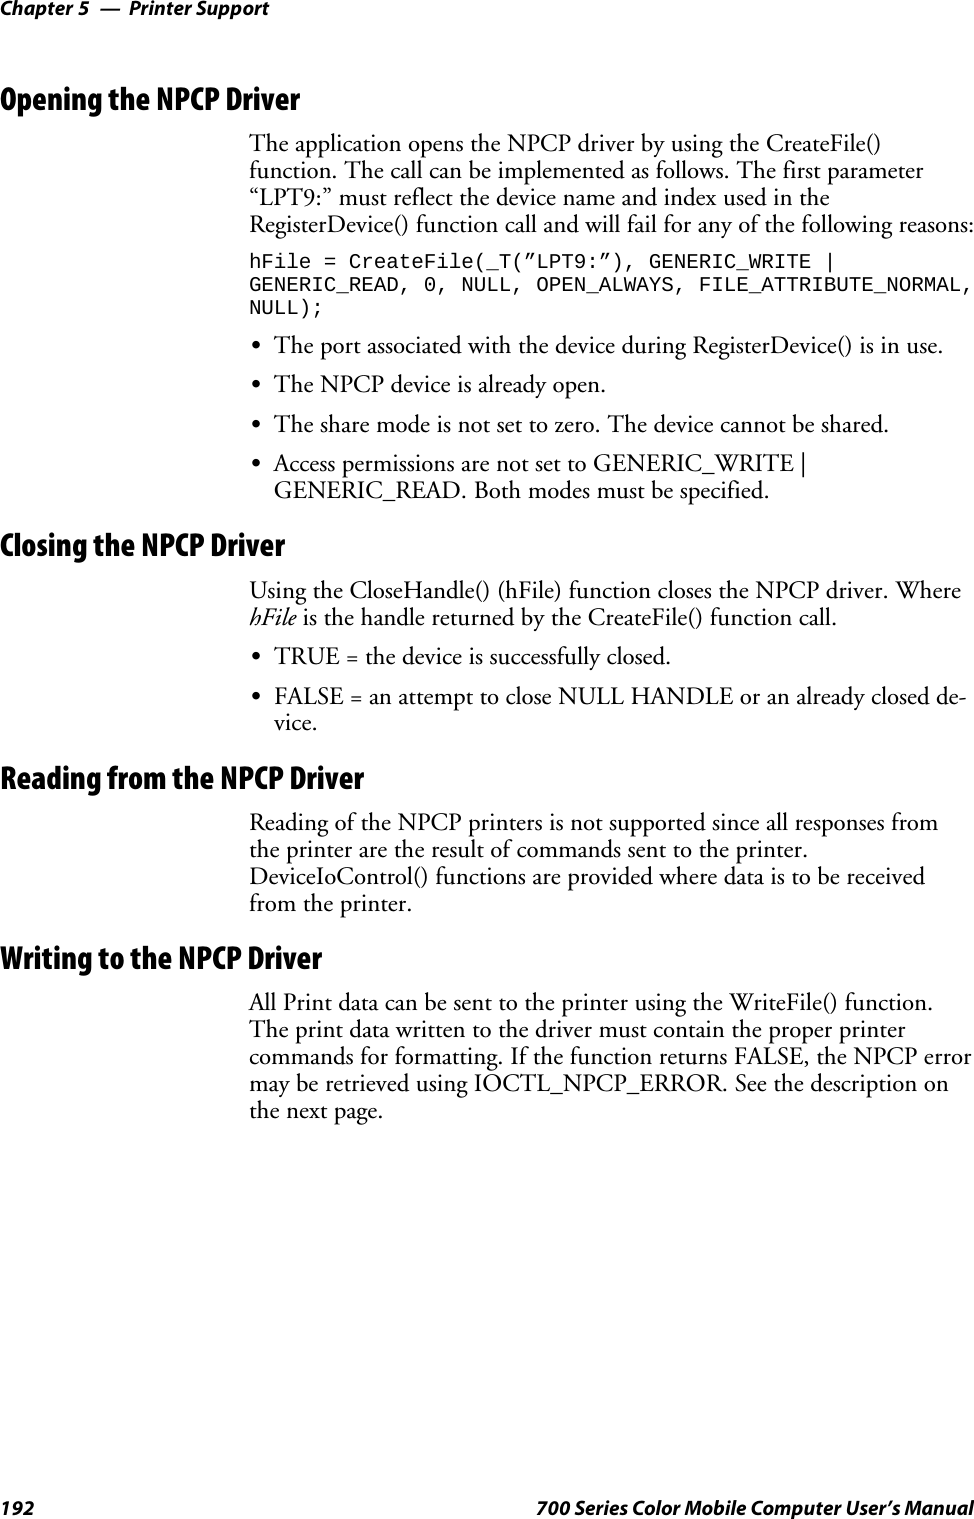 Printer SupportChapter —5192 700 Series Color Mobile Computer User’s ManualOpening the NPCP DriverTheapplicationopenstheNPCPdriverbyusingtheCreateFile()function. The call can be implemented as follows. The first parameter“LPT9:”mustreflectthedevicenameandindexusedintheRegisterDevice() function call and will fail for any of the following reasons:hFile = CreateFile(_T(”LPT9:”), GENERIC_WRITE |GENERIC_READ, 0, NULL, OPEN_ALWAYS, FILE_ATTRIBUTE_NORMAL,NULL);SThe port associated with the device during RegisterDevice() is in use.SThe NPCP device is already open.SThe share mode is not set to zero. The device cannot be shared.SAccess permissions are not set to GENERIC_WRITE |GENERIC_READ. Both modes must be specified.Closing the NPCP DriverUsing the CloseHandle() (hFile) function closes the NPCP driver. WherehFile is the handle returned by the CreateFile() function call.STRUE = the device is successfully closed.SFALSE = an attempt to close NULL HANDLE or an already closed de-vice.Reading from the NPCP DriverReading of the NPCP printers is not supported since all responses fromthe printer are the result of commands sent to the printer.DeviceIoControl() functions are provided where data is to be receivedfrom the printer.Writing to the NPCP DriverAll Print data can be sent to the printer using the WriteFile() function.The print data written to the driver must contain the proper printercommands for formatting. If the function returns FALSE, the NPCP errormay be retrieved using IOCTL_NPCP_ERROR. See the description onthe next page.